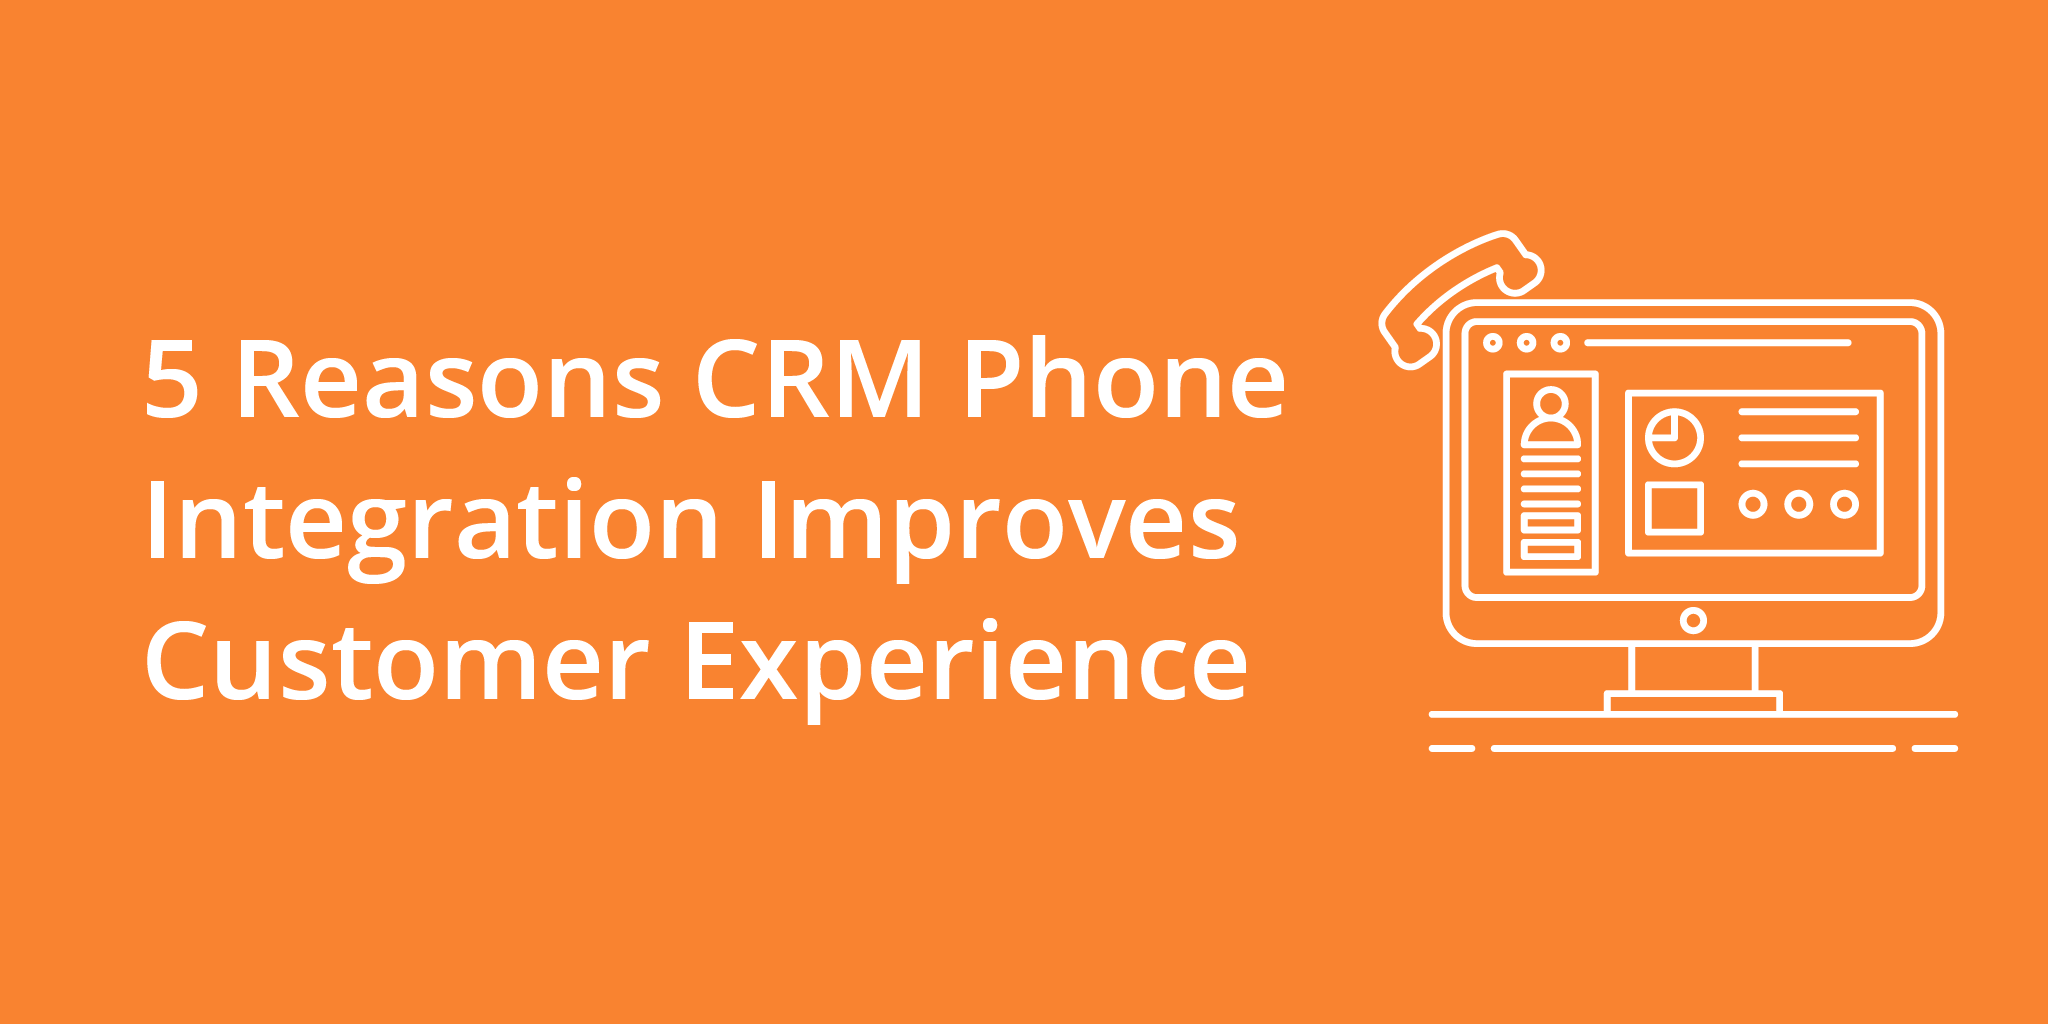 5 Reasons CRM Phone Integration Improves Customer Experience | Telephones for business